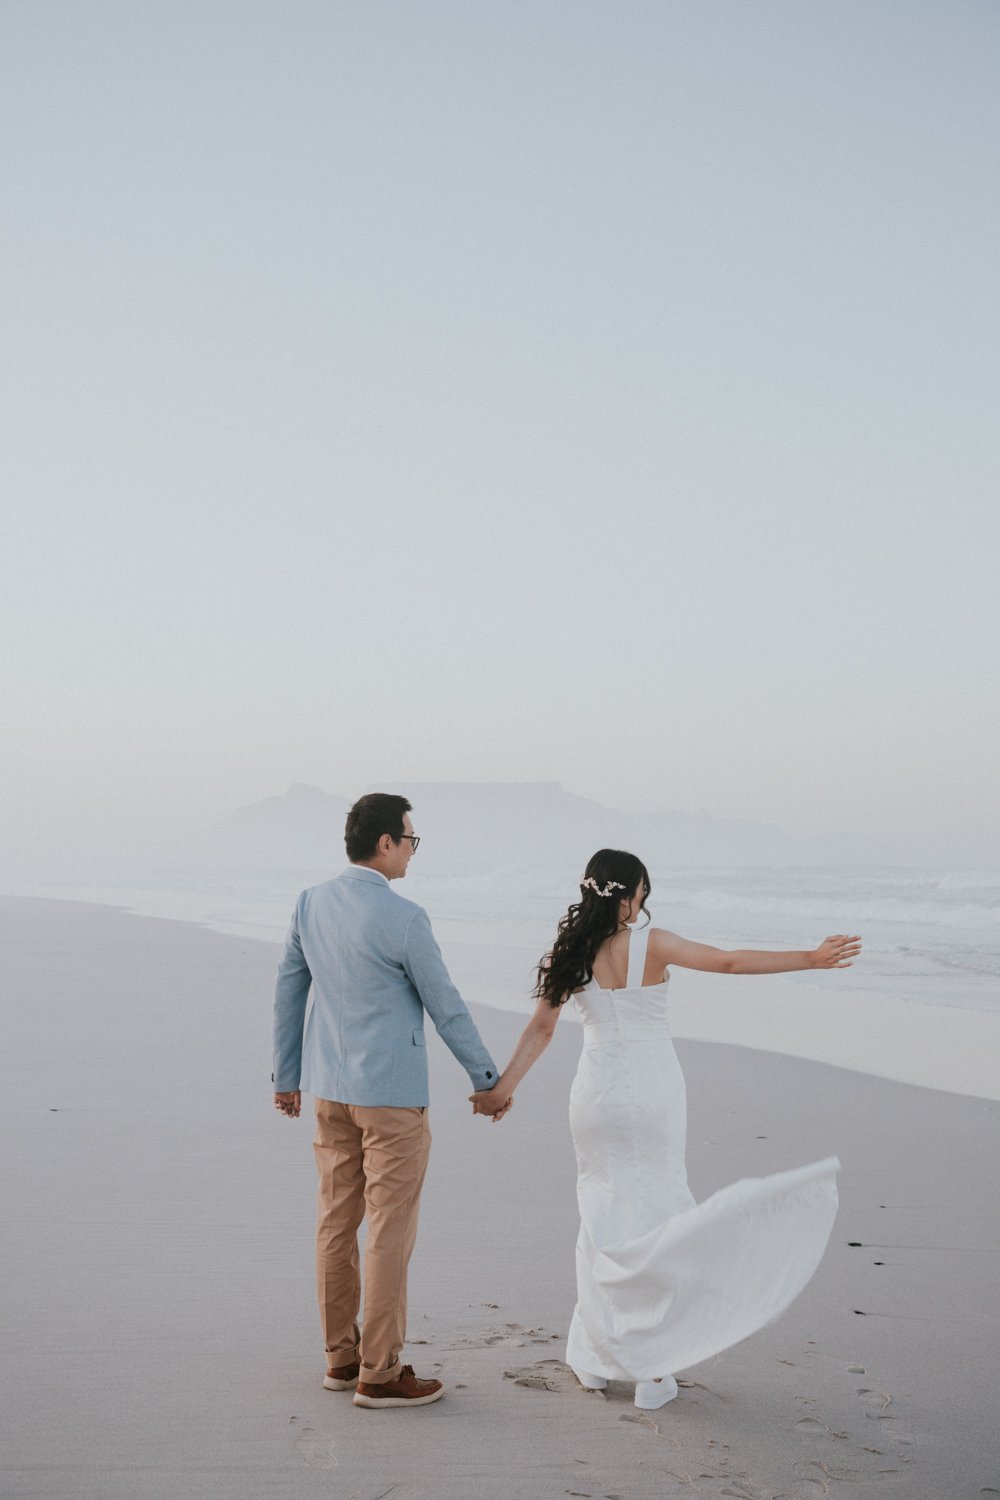 Wedding Shoot in Cape Town - Bianca Asher Photography-6.jpg